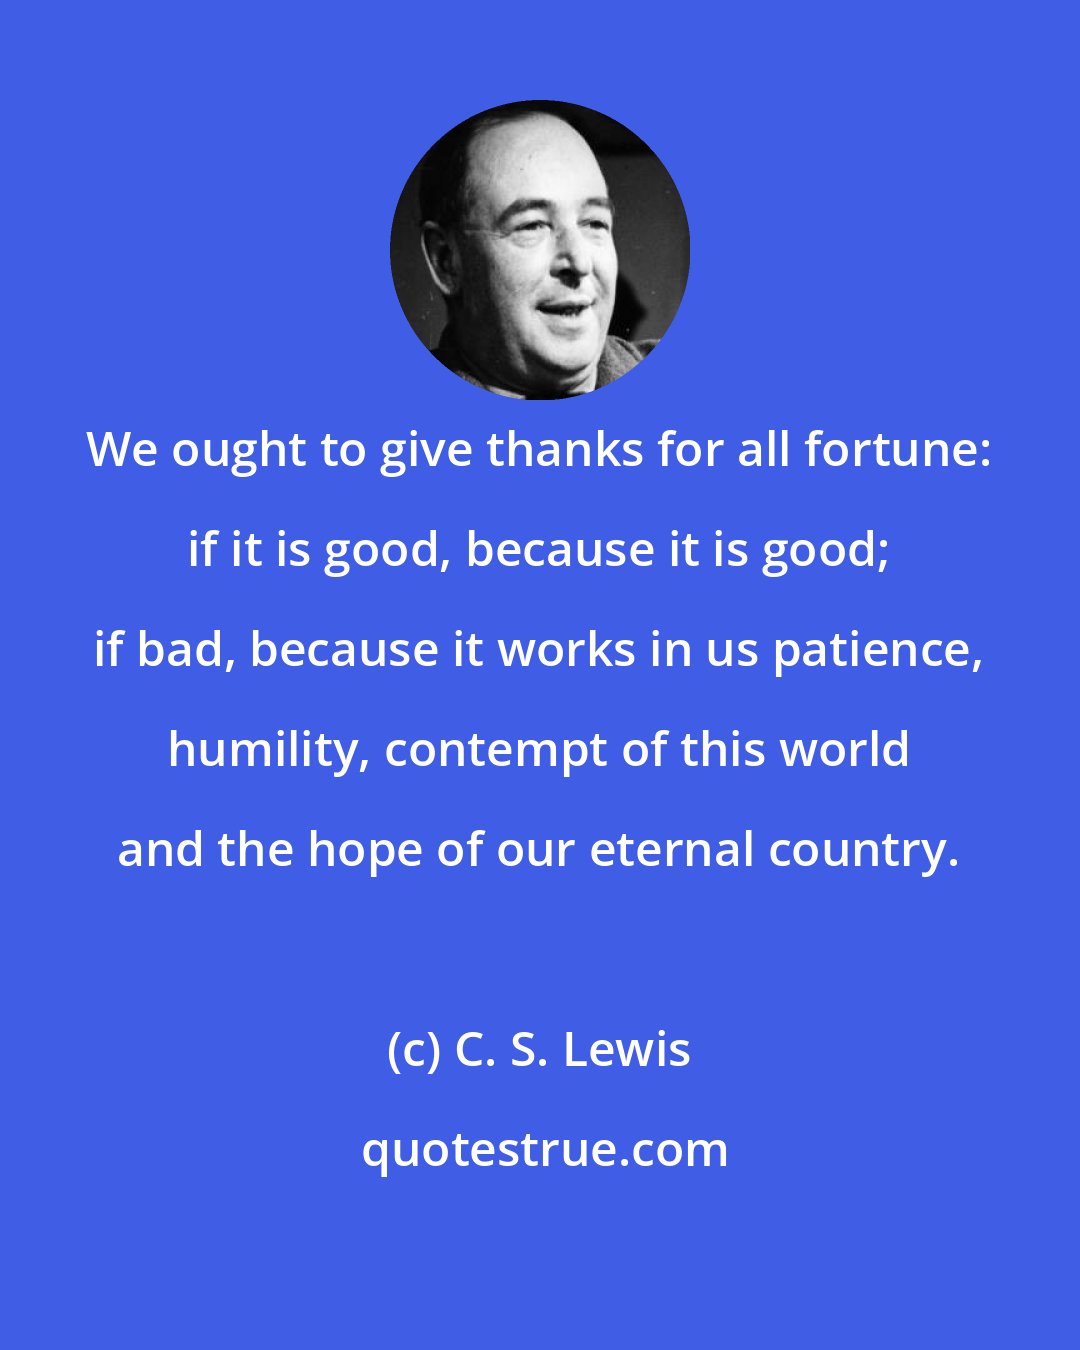 C. S. Lewis: We ought to give thanks for all fortune: if it is good, because it is good; if bad, because it works in us patience, humility, contempt of this world and the hope of our eternal country.